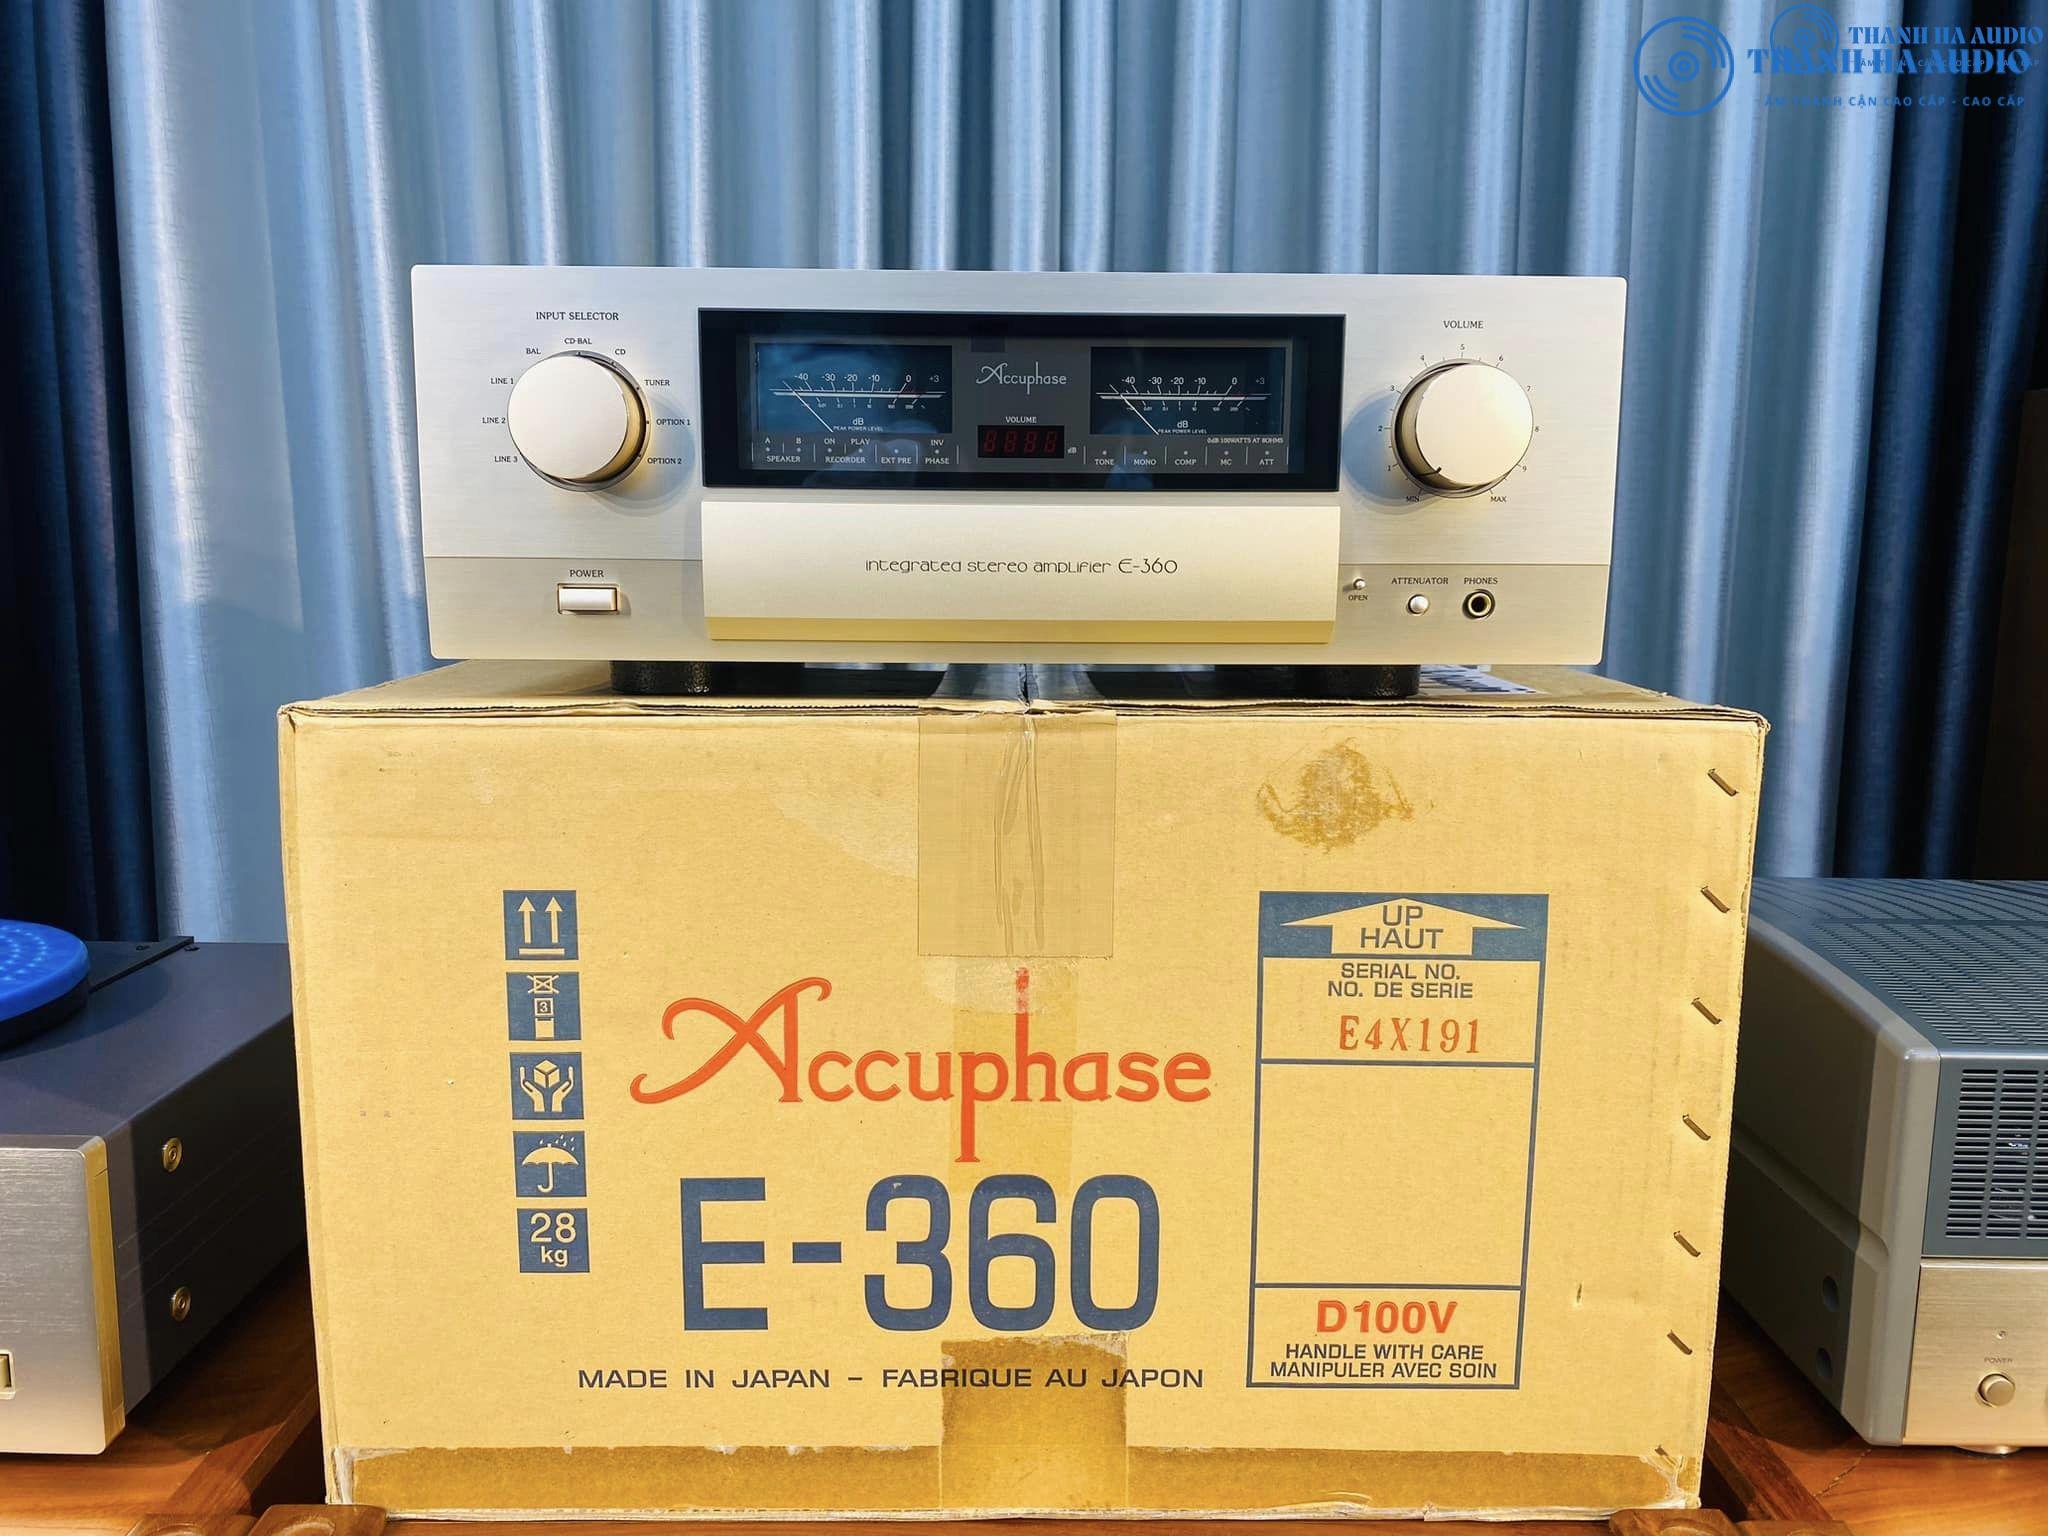 ACCUPHASE E-360 thung xop